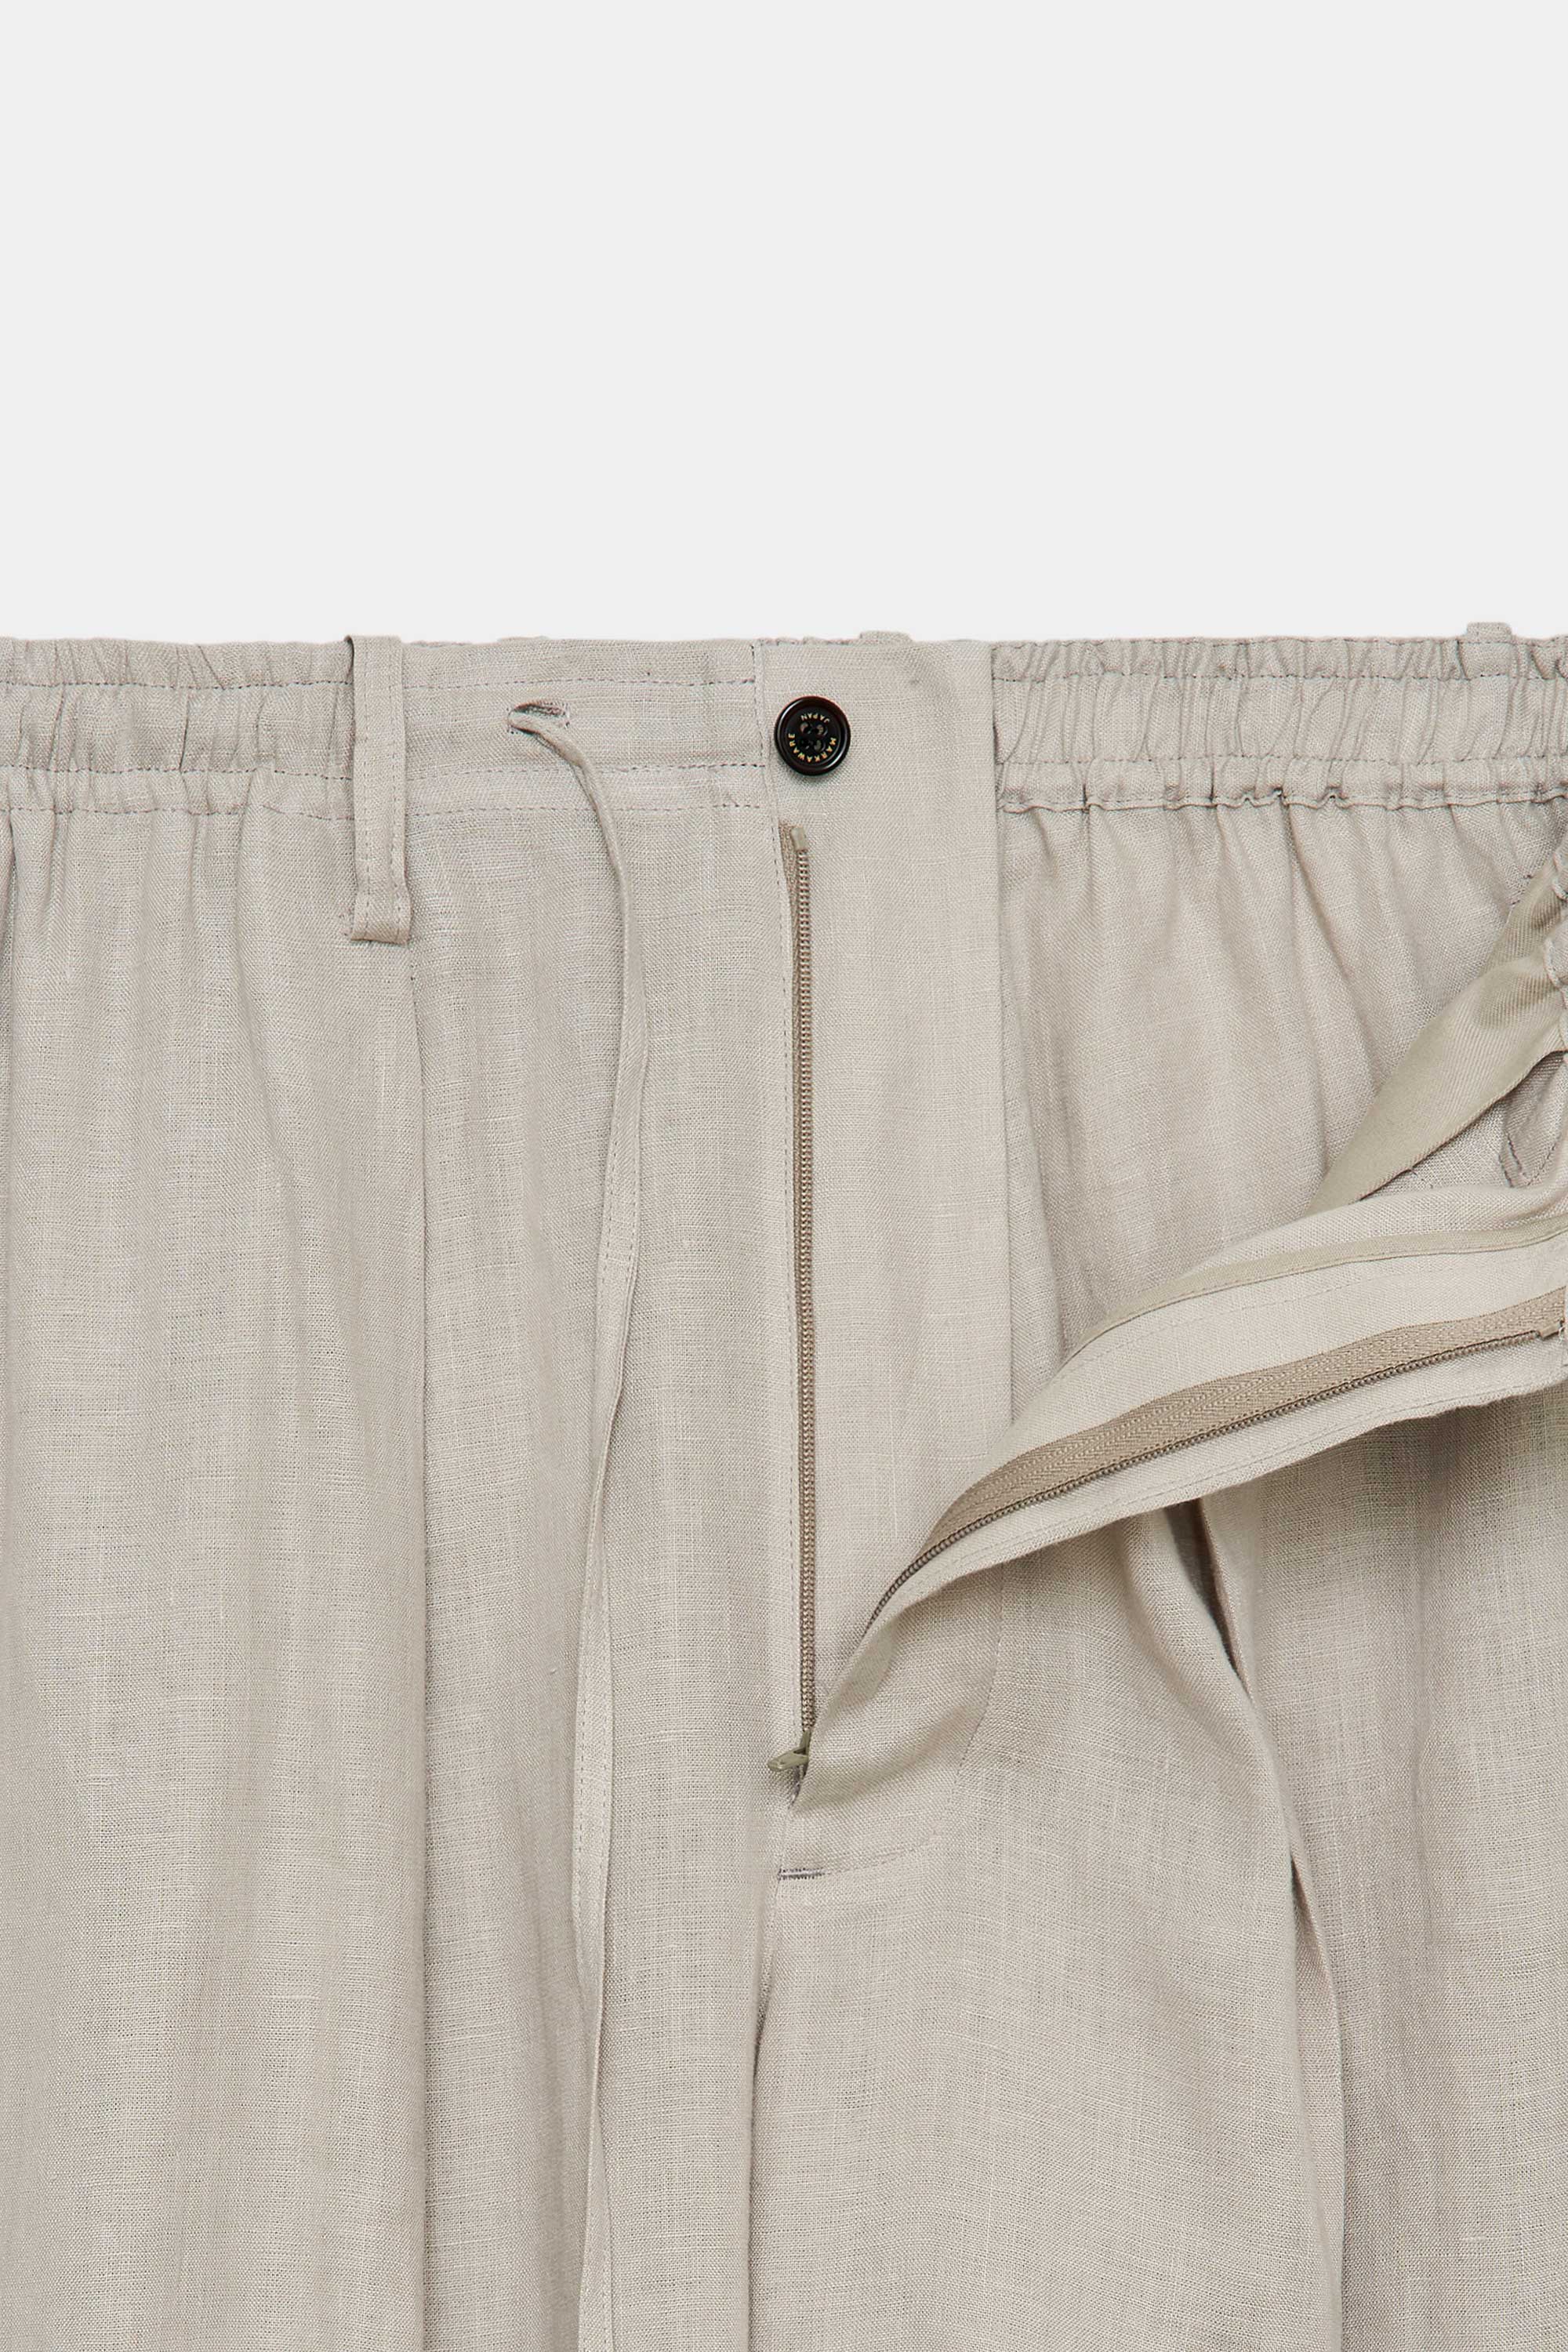 HEMP SHIRTING CLASSIC FIT EASY PANTS, Taupe